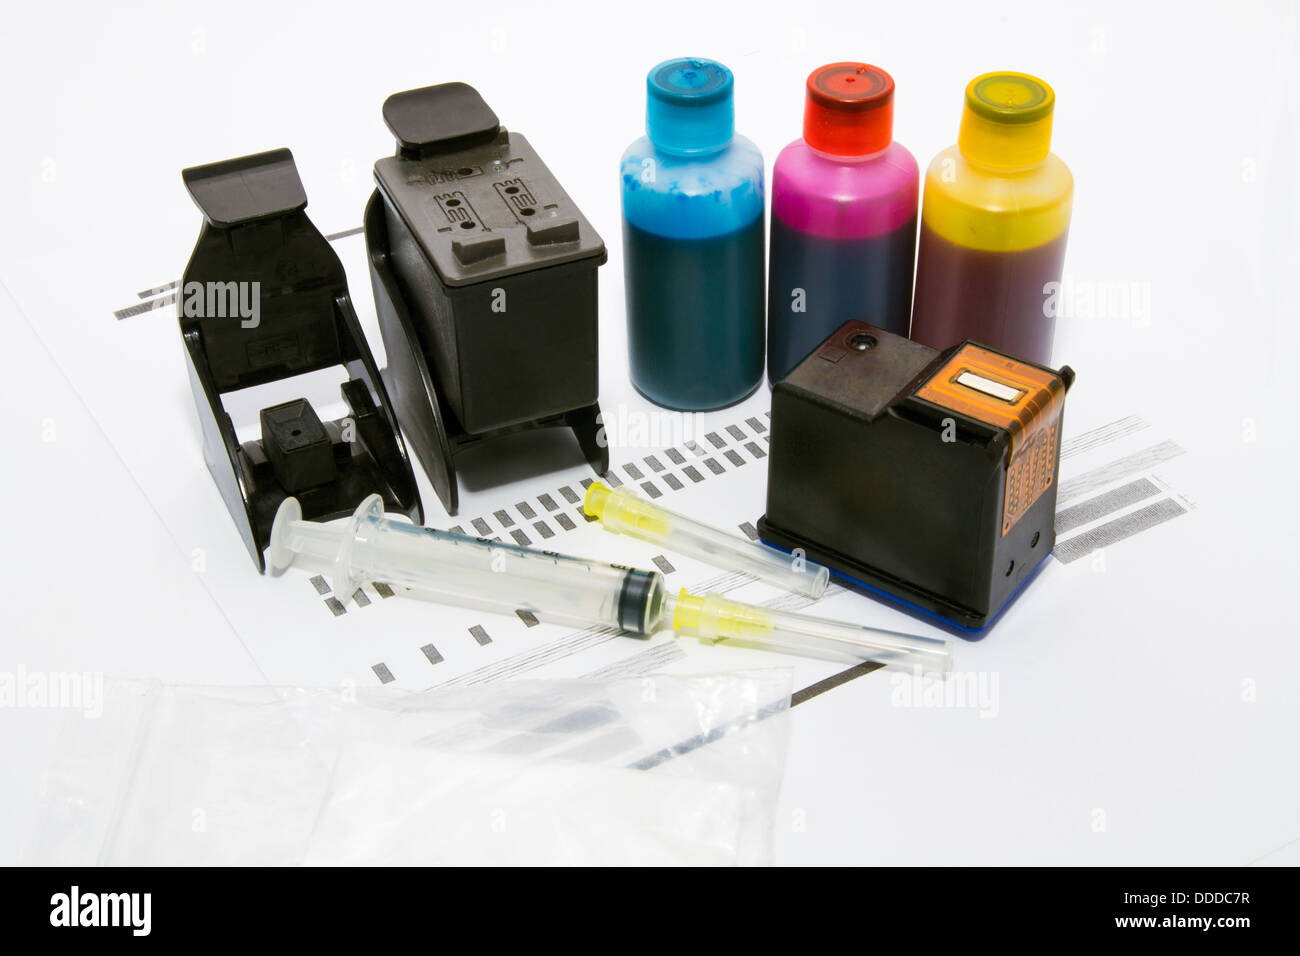 Ink refill set for printer Stock Photo